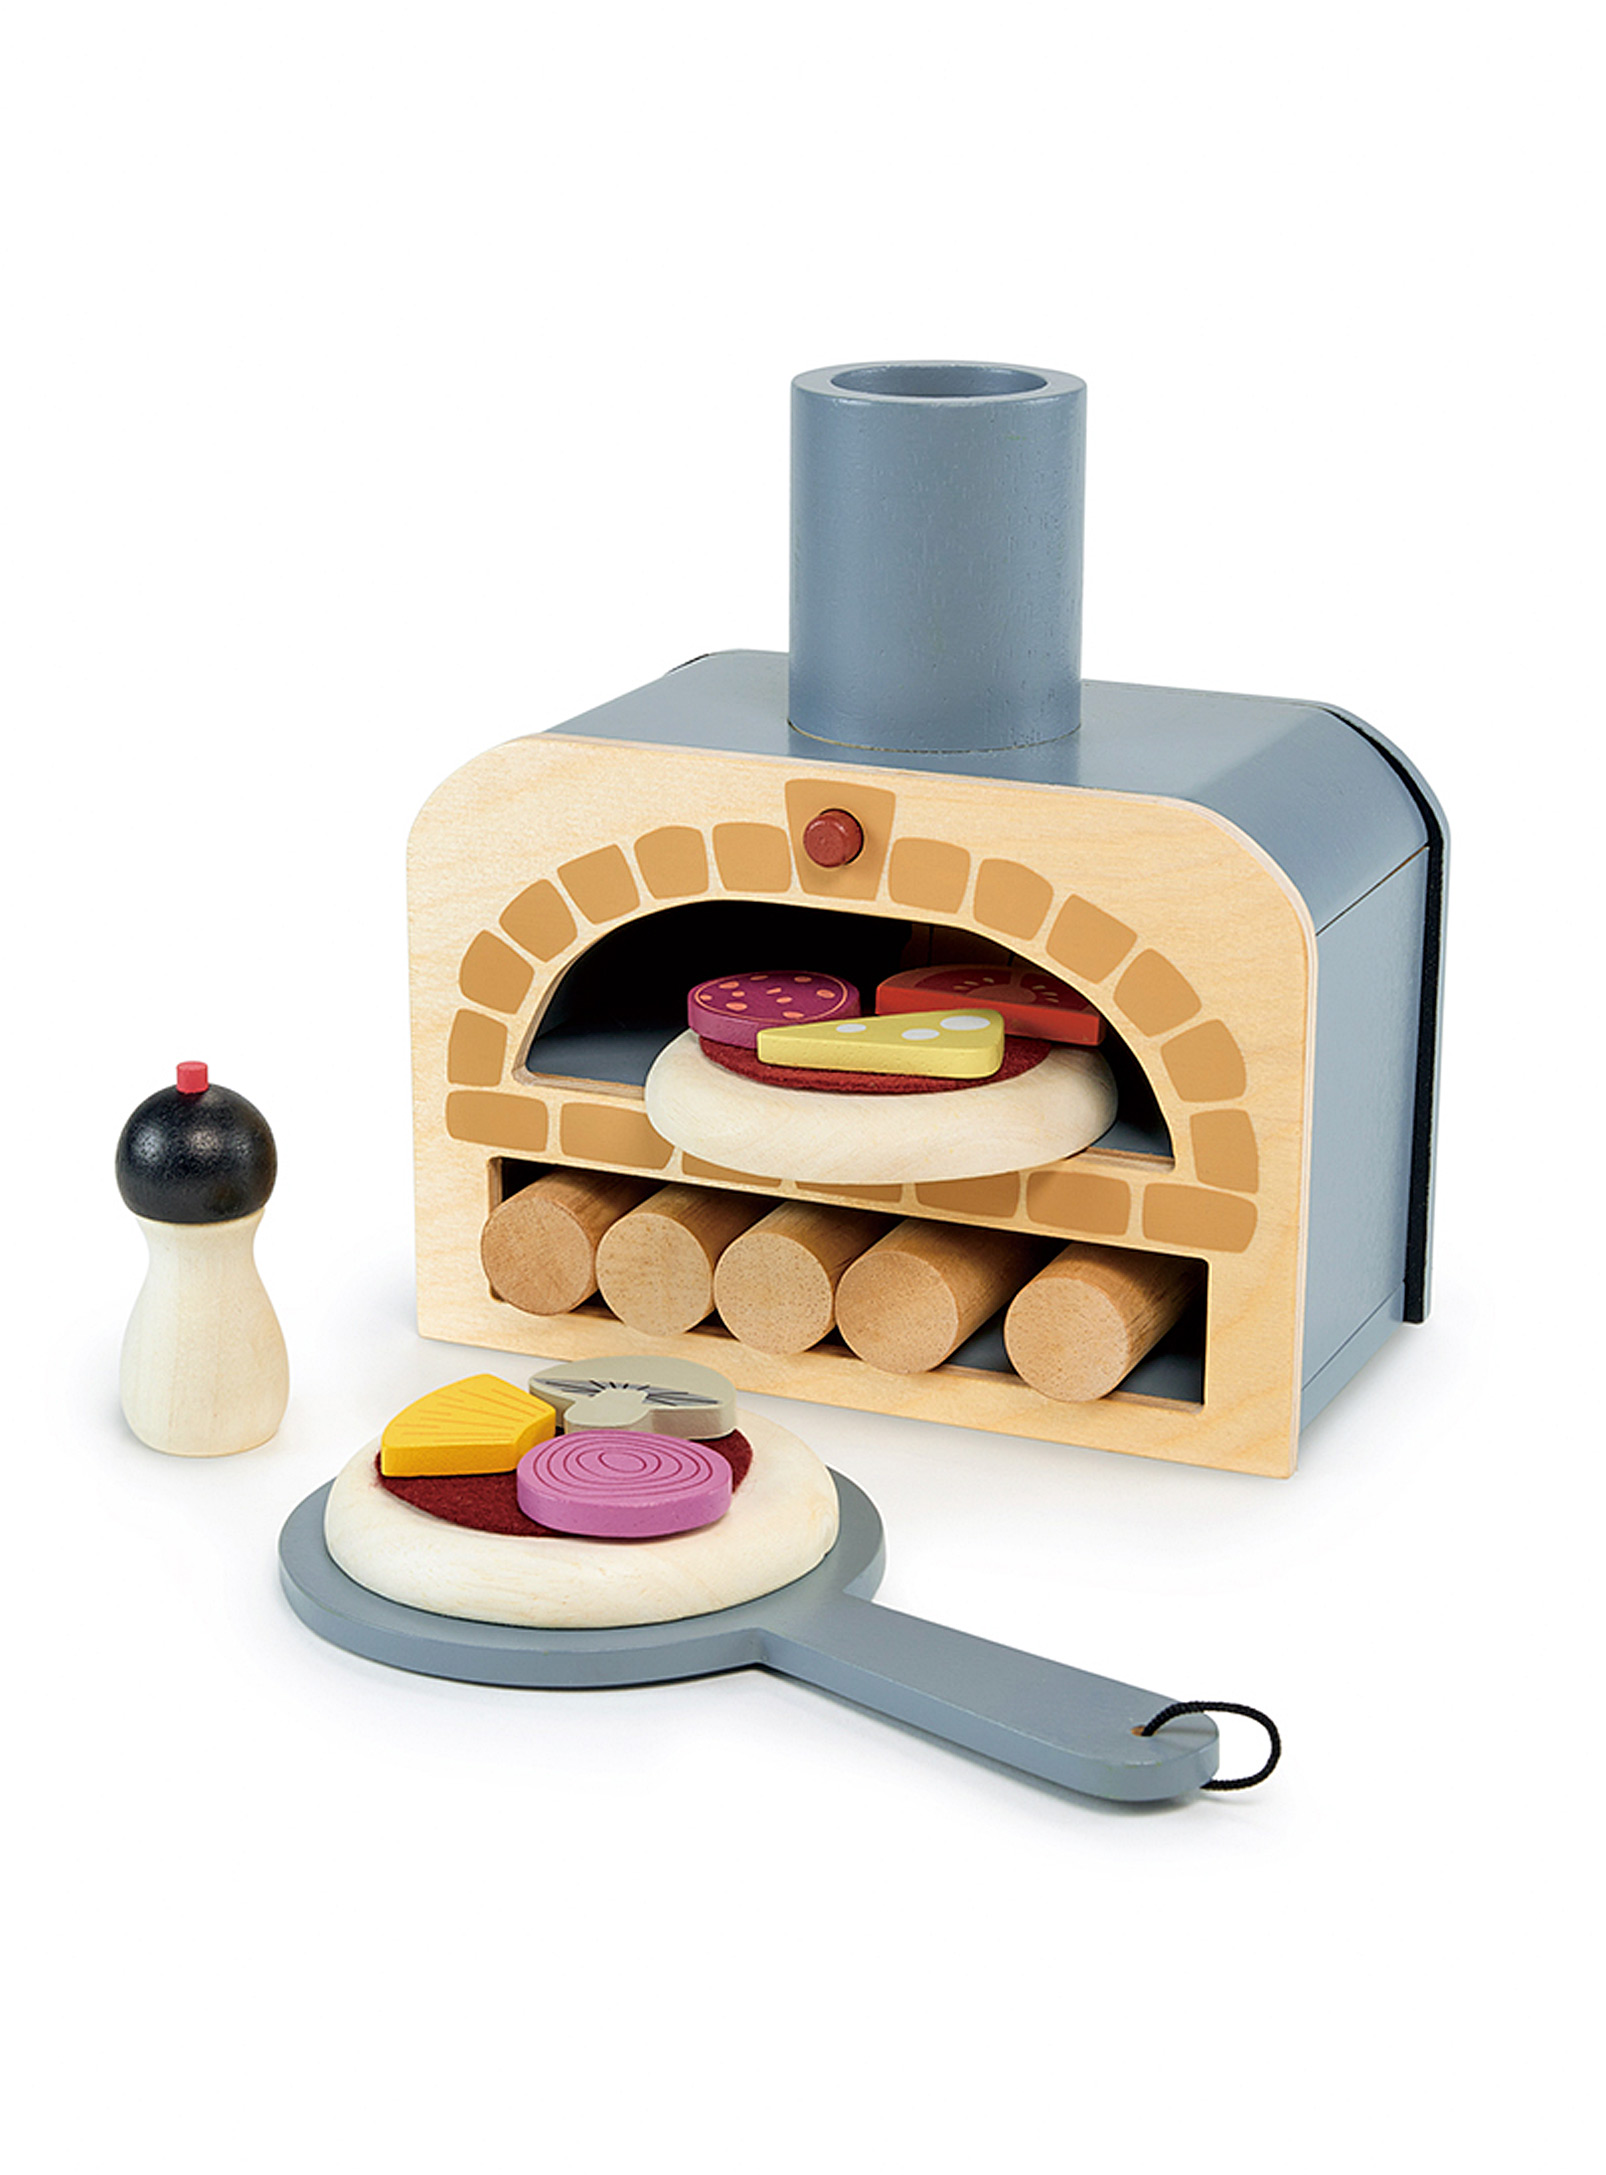 Tender Leaf Toys - Wooden pizza oven and accessories